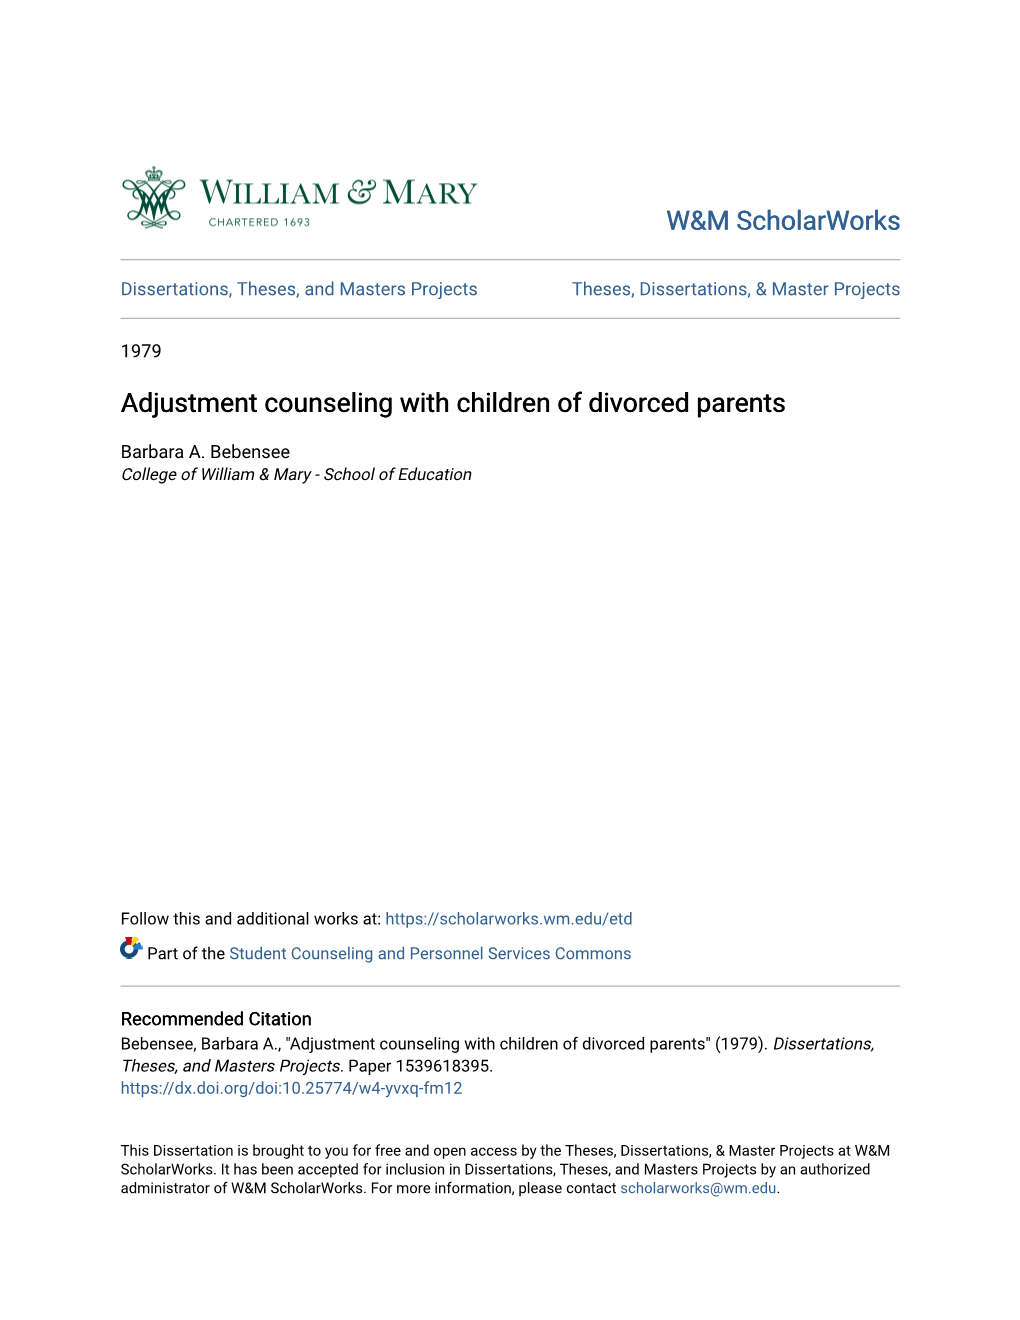 Adjustment Counseling with Children of Divorced Parents